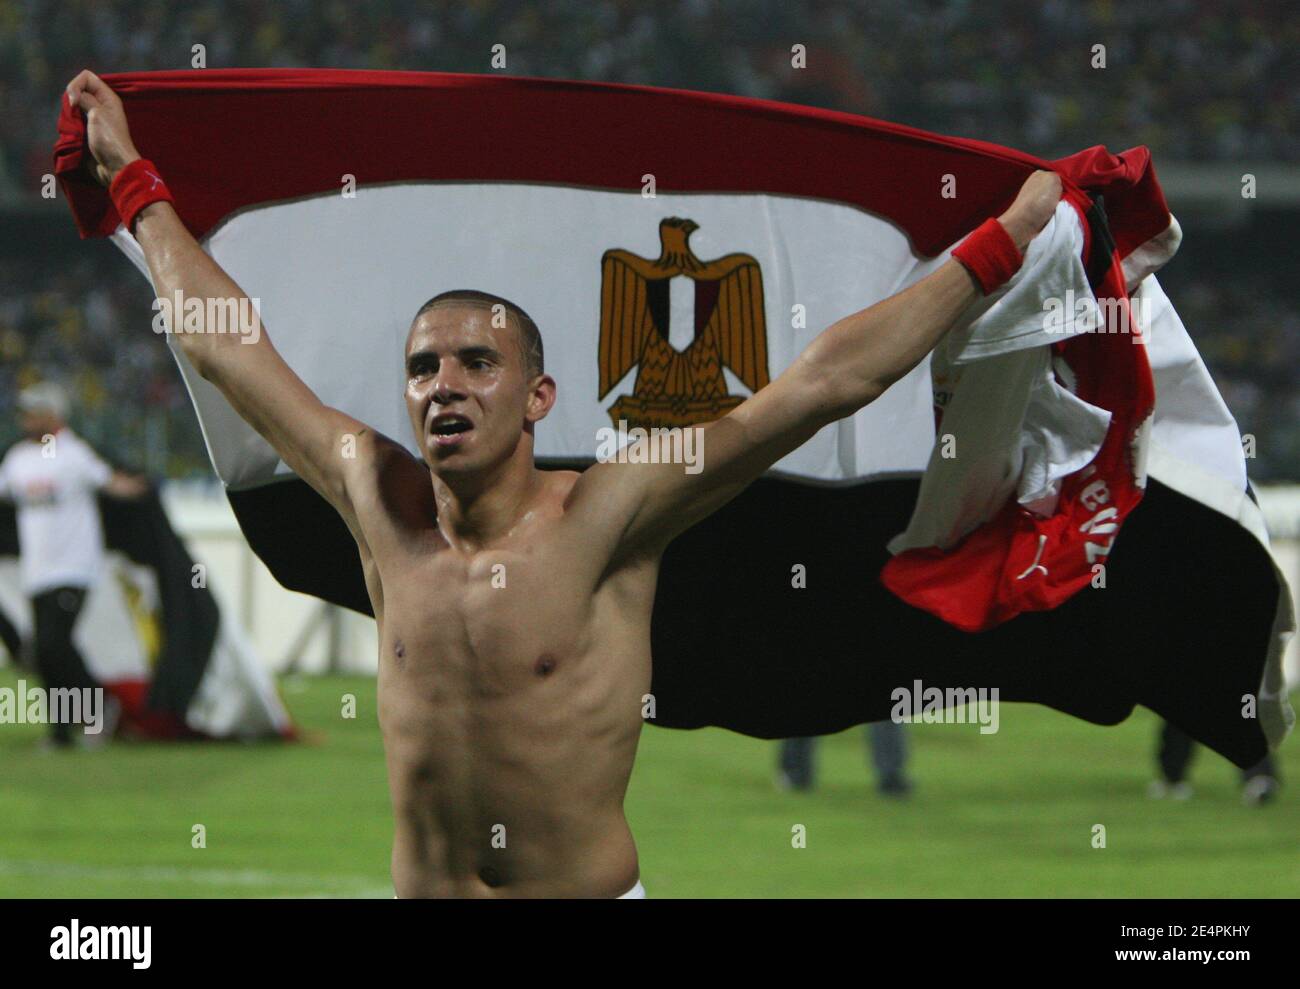 Egypt's Mohamed Abdalla Mohamed Zidan celebrates with Egypt's flag during the Final of the 2008 African Cup of Nations soccer tournament, Cameroon vs Egypt in Accra, Ghana on February 10, 2008. Egypt won the match 1-0. Photo by Steeve McMay/Cameleon/ABACAPRESS.COM Stock Photo